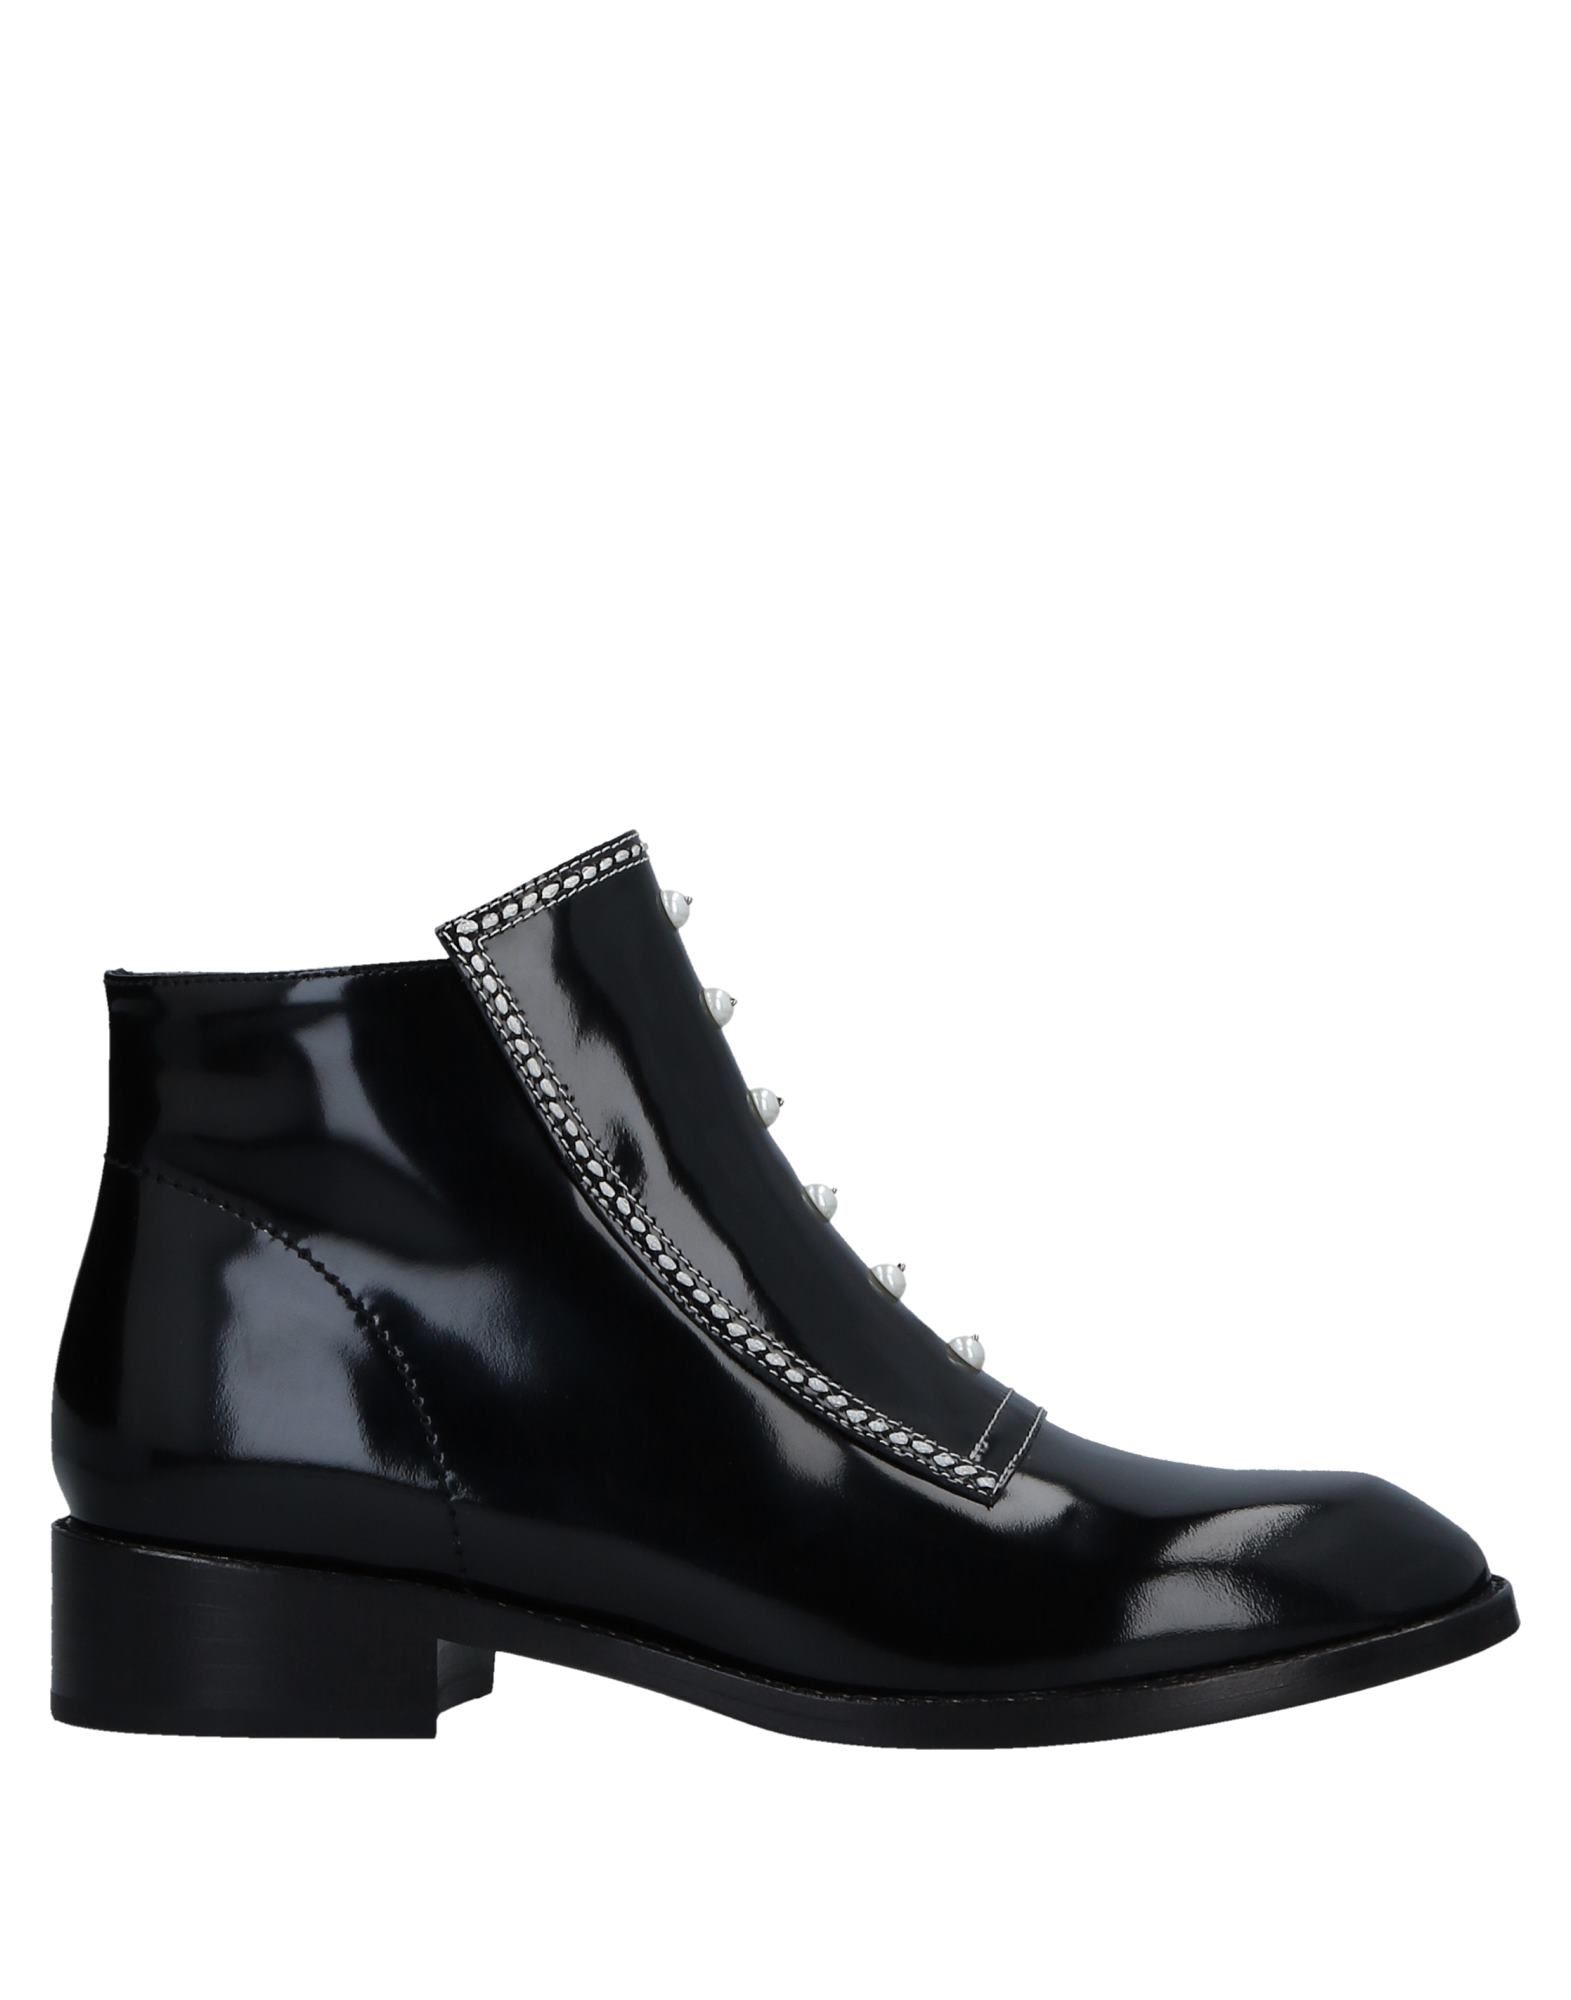 OPENING CEREMONY Ankle boot,11515160AC 5